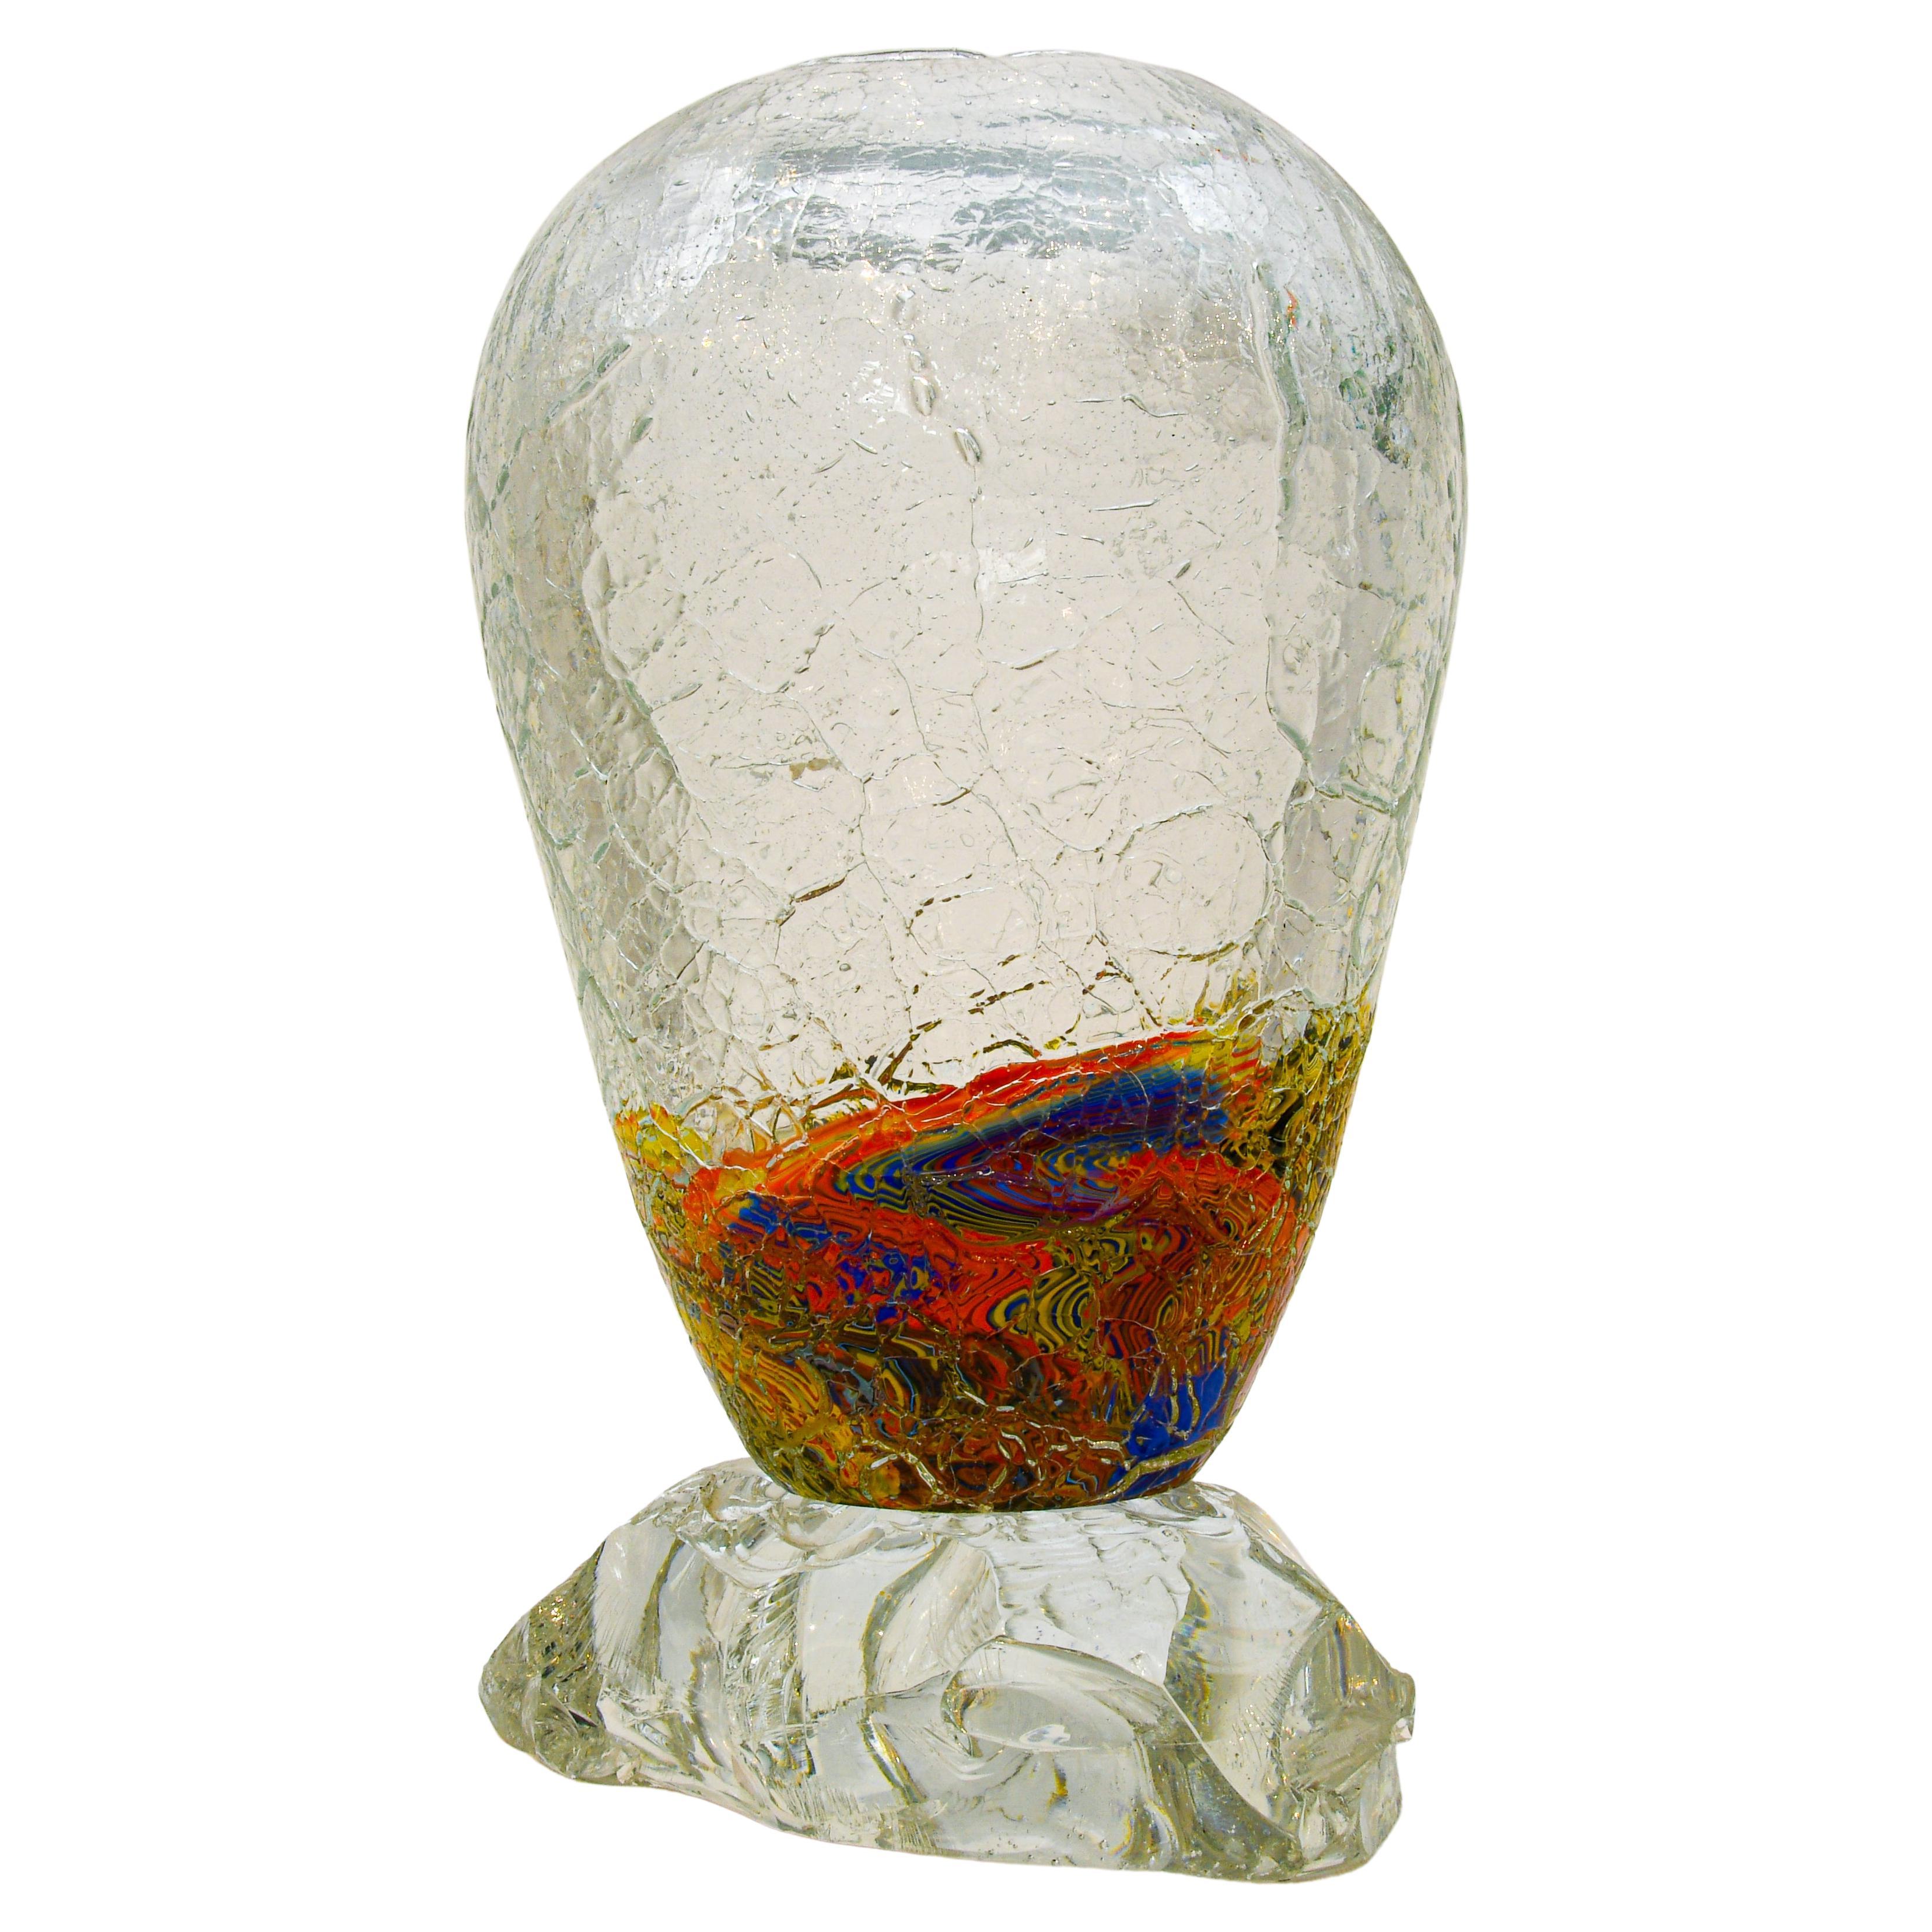 This large unique Murano glass vase was made using the 